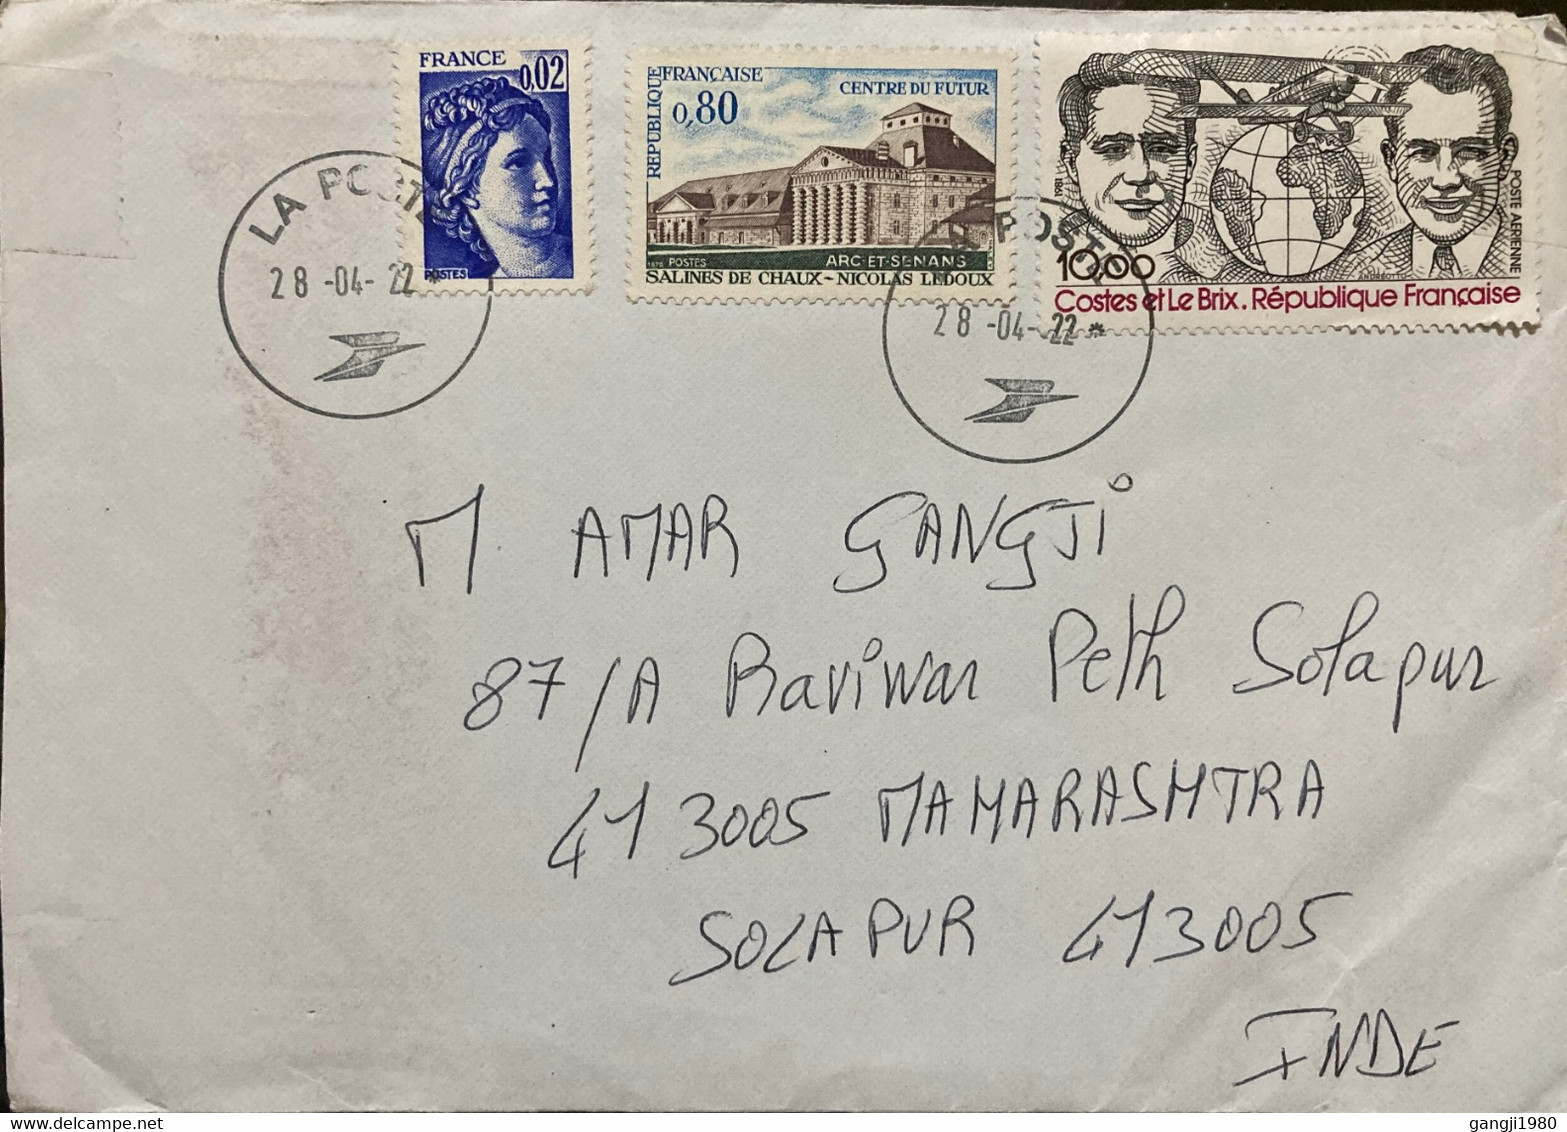 FRANCE 2022, QUEEN,AEROPLANE,GLOBE,BUILDING,ARCHITECTURE,3 STAMPS USED COVER TO INDIA - Briefe U. Dokumente